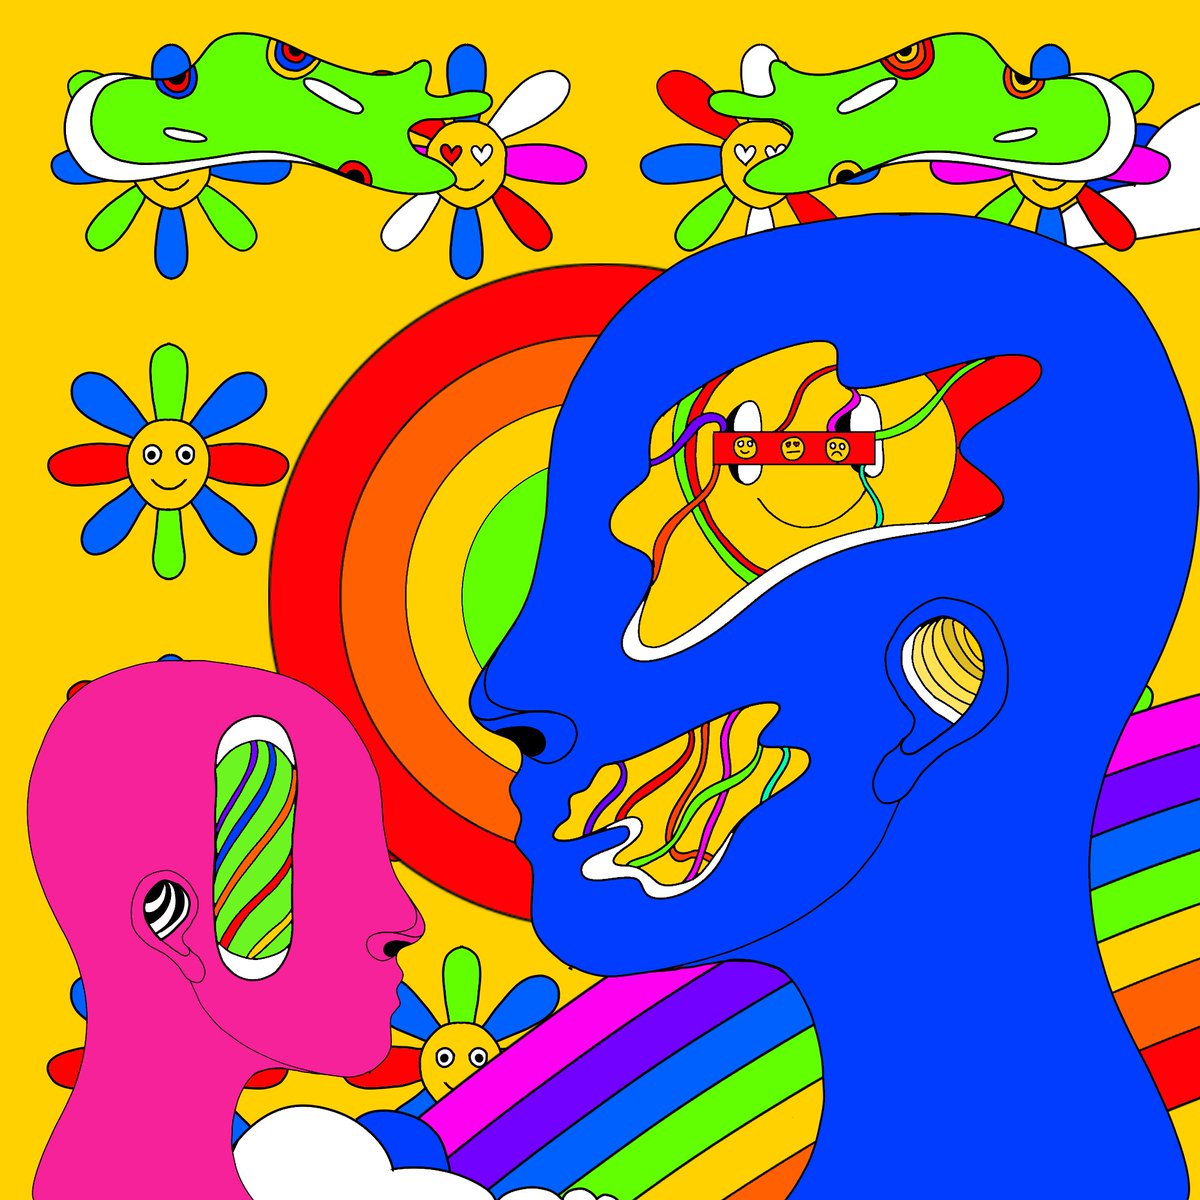 My works in this style will always be on Tezos.

Rainbows & Emojination
5 $XTZ
objkt.com/collection/KT1…
#tezosart